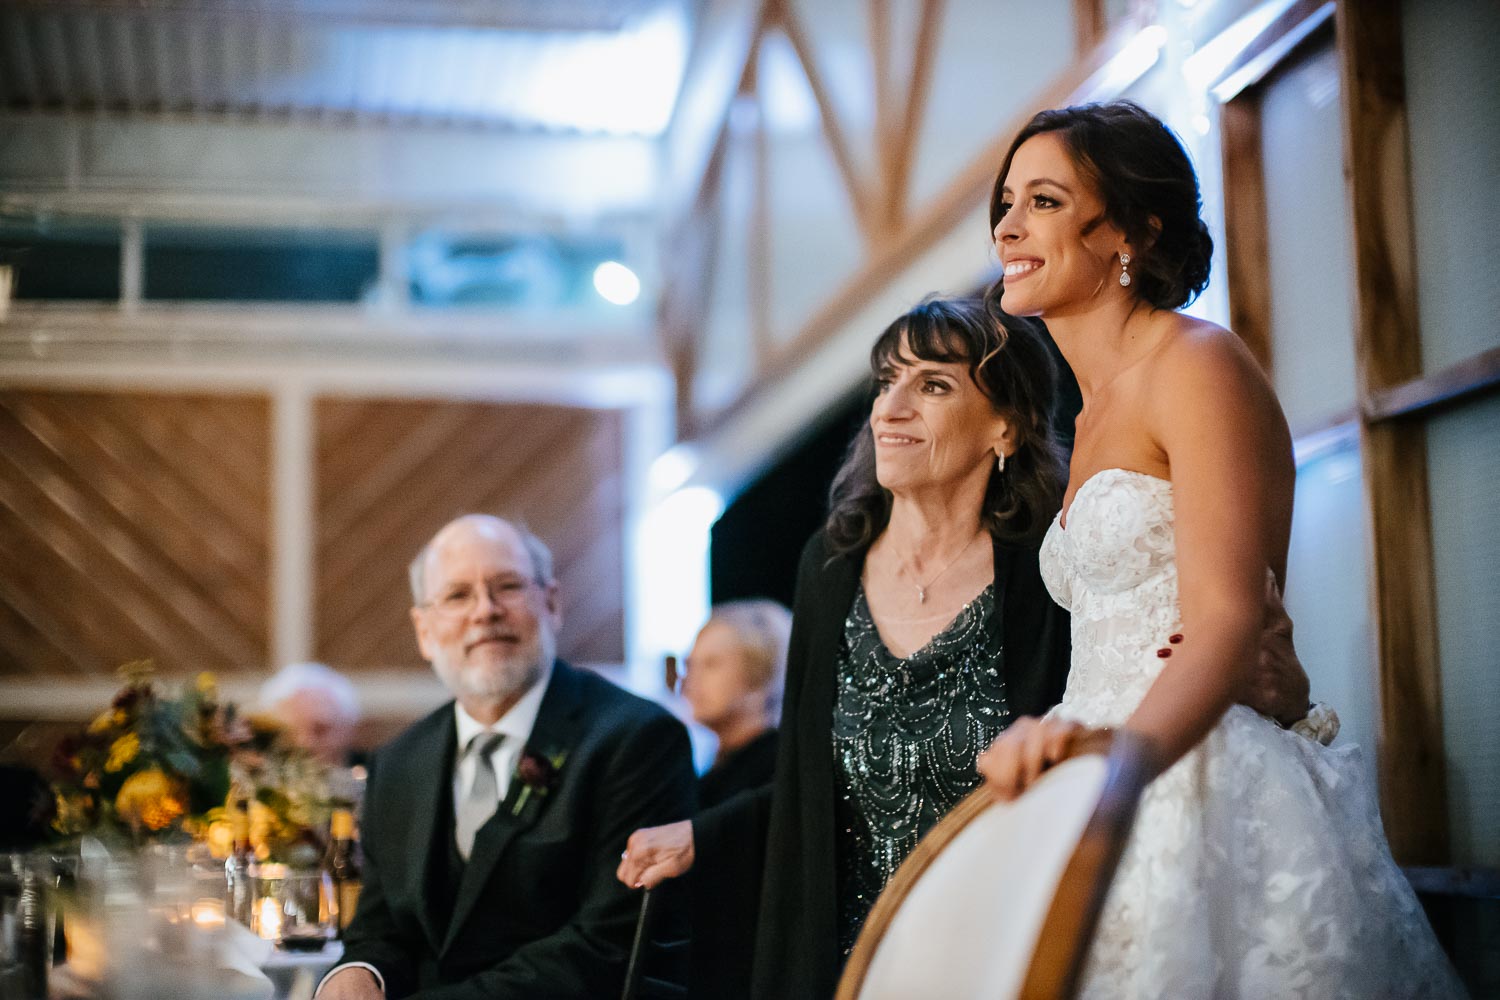 Mother of the bride and bride watch first dance with groom and his mother